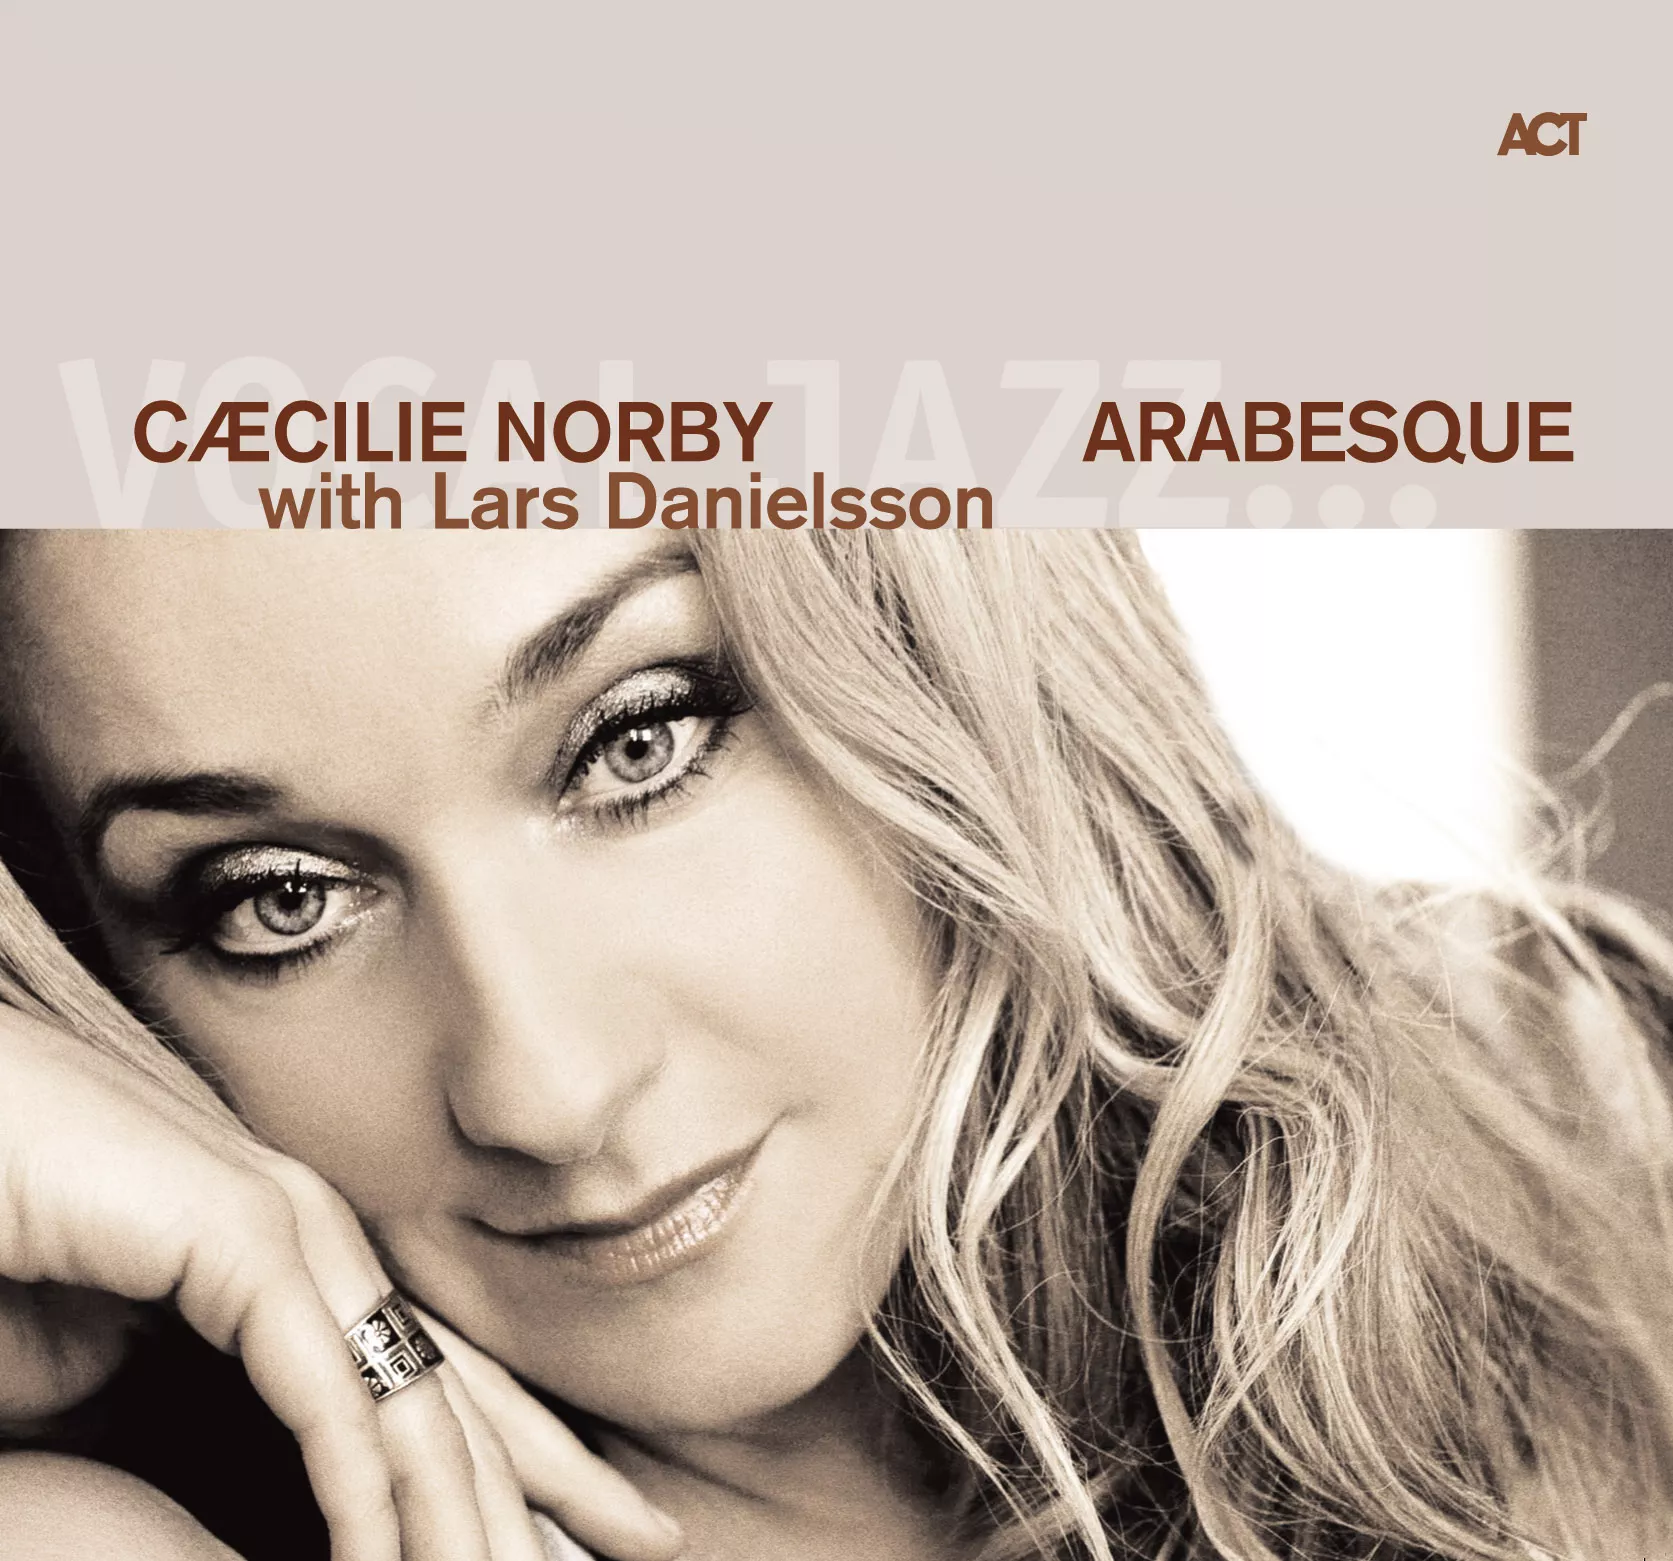 Arabesque - Cæcilie Norby with Lars Danielsson